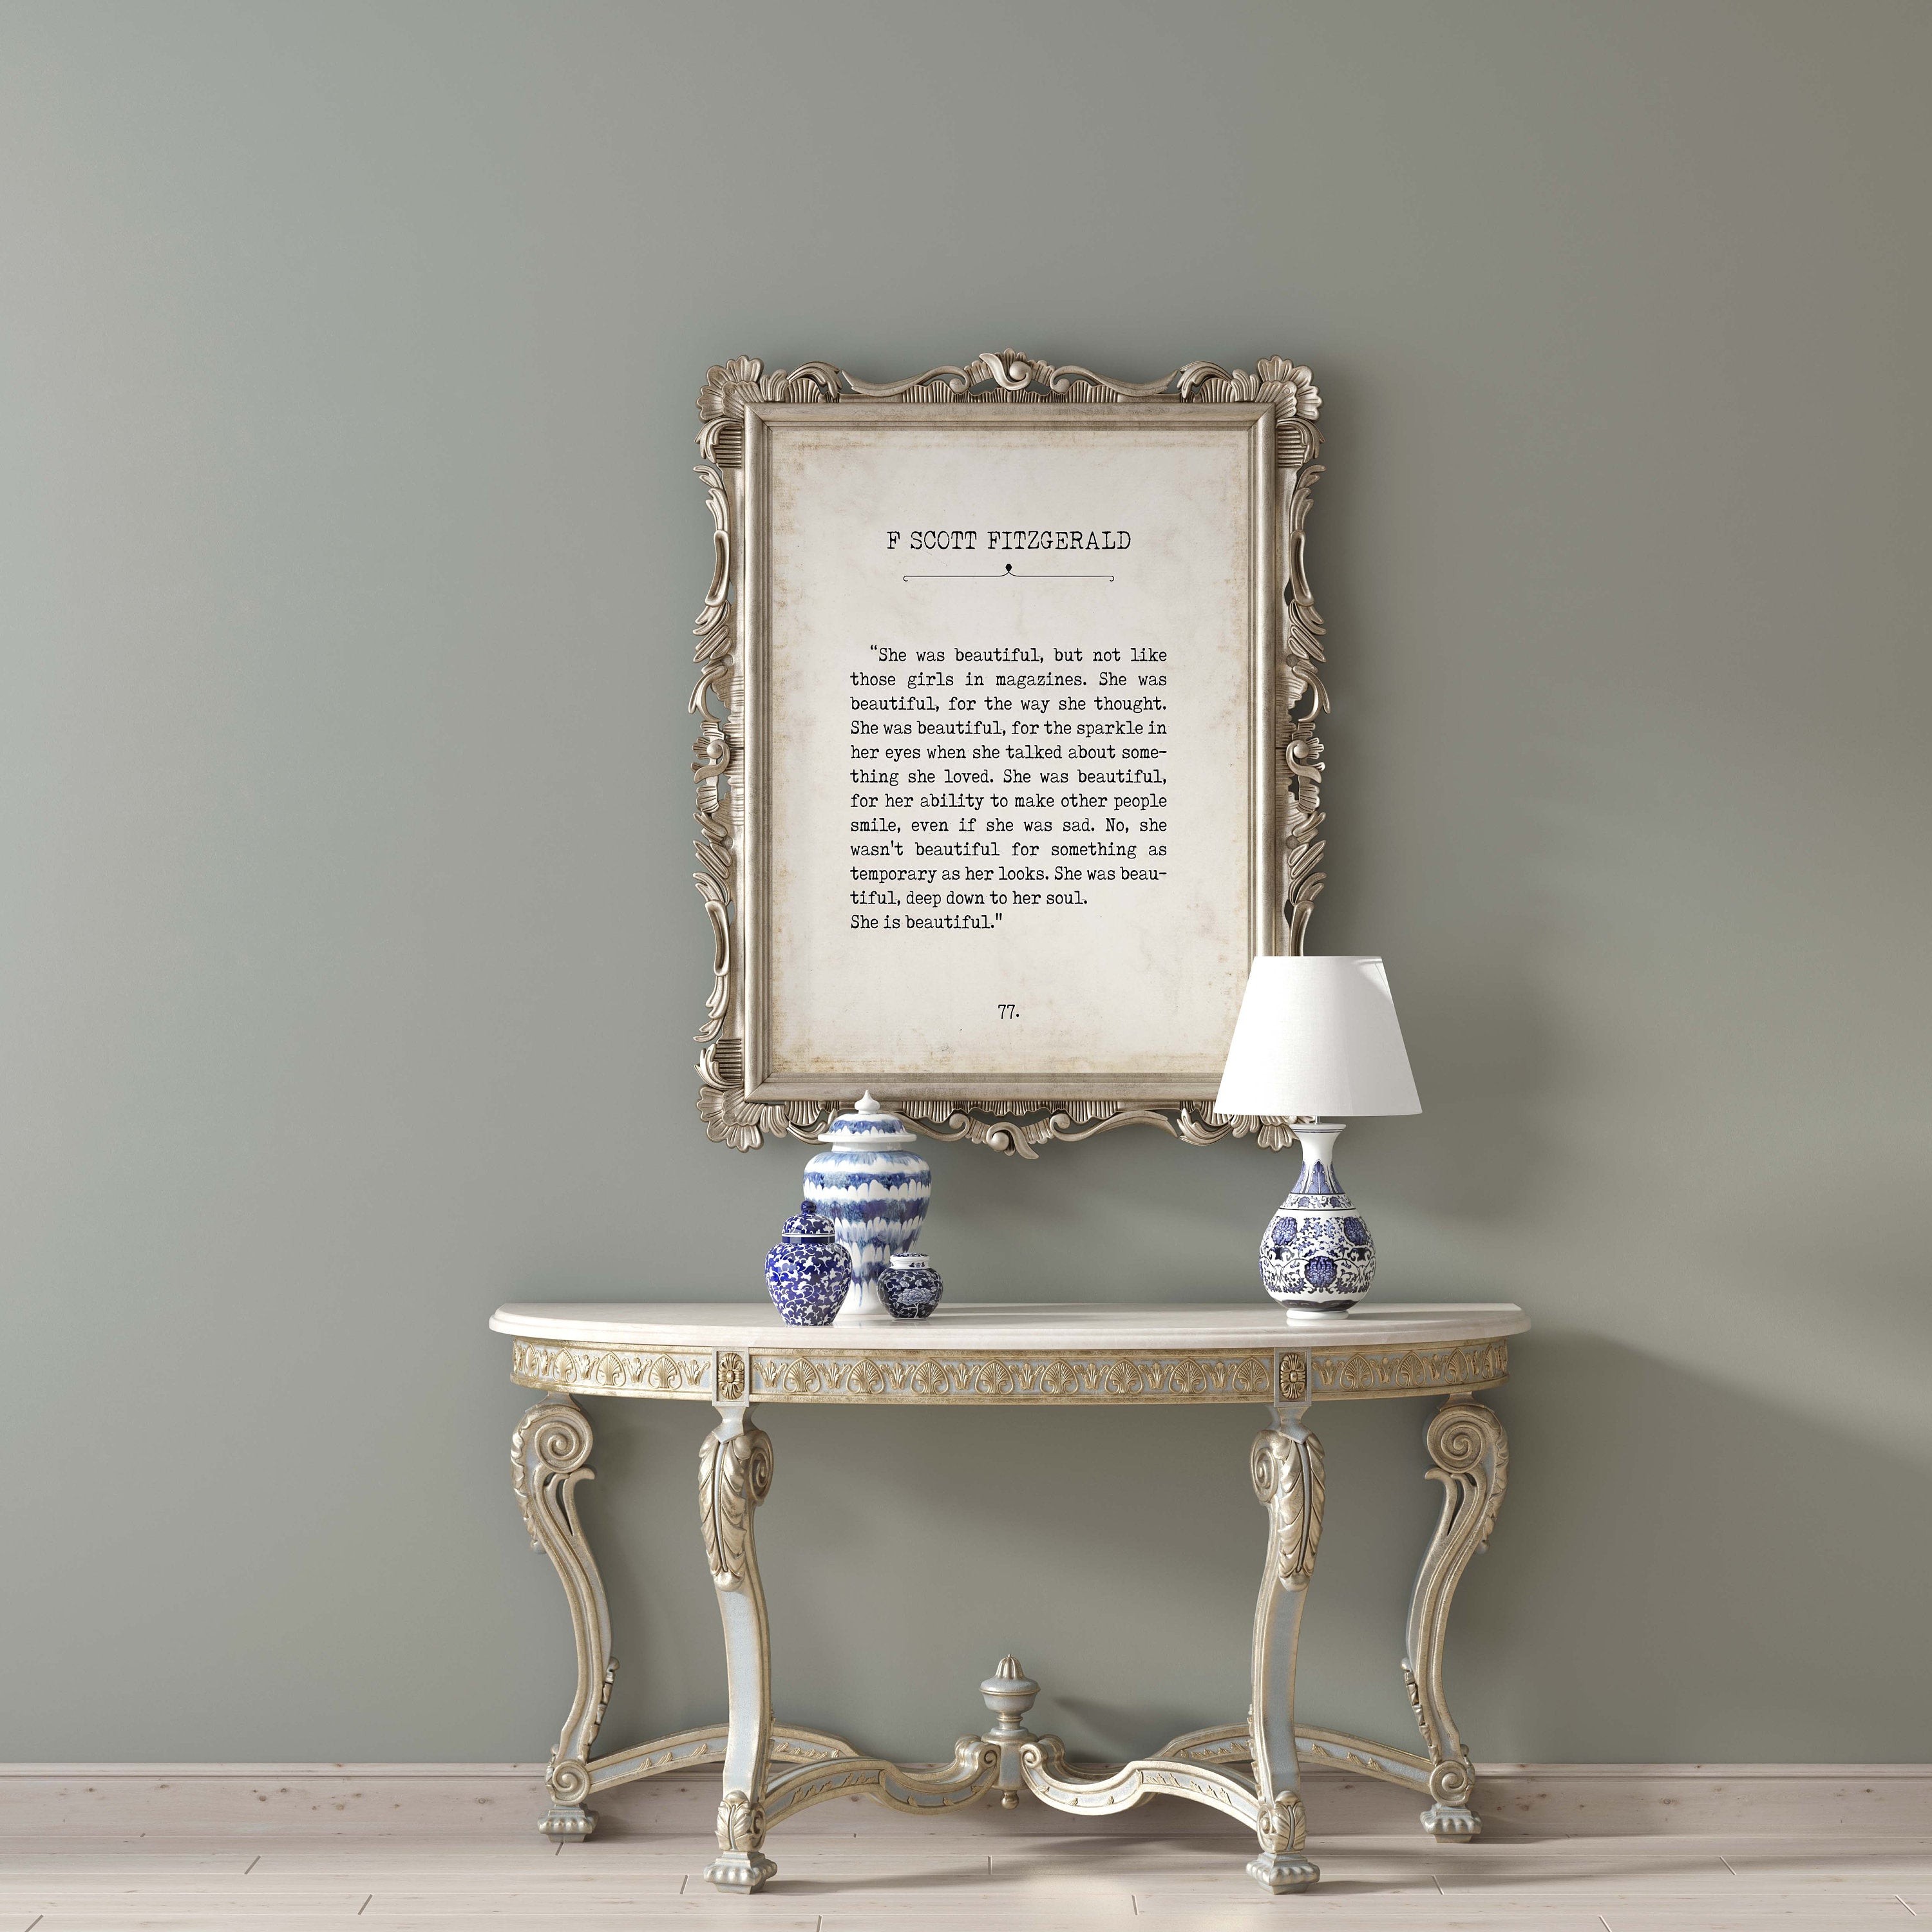 She Is Beautiful FS Fitzgerald Book Page Inspirational Wall Art, Vintage Style Print Decor She was beautiful deep down to her soul